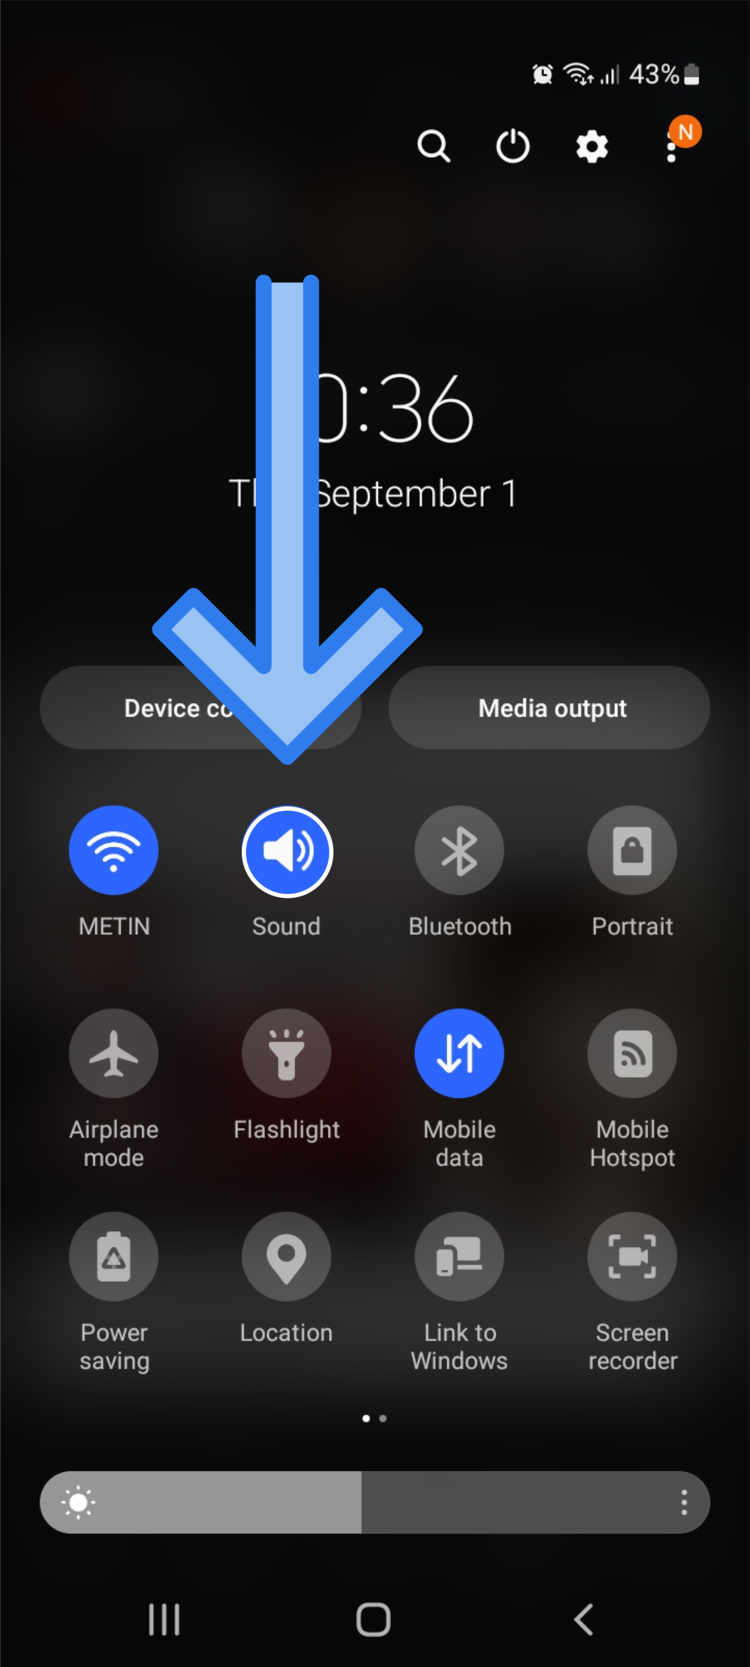 Tap on the ‘sound’ icon